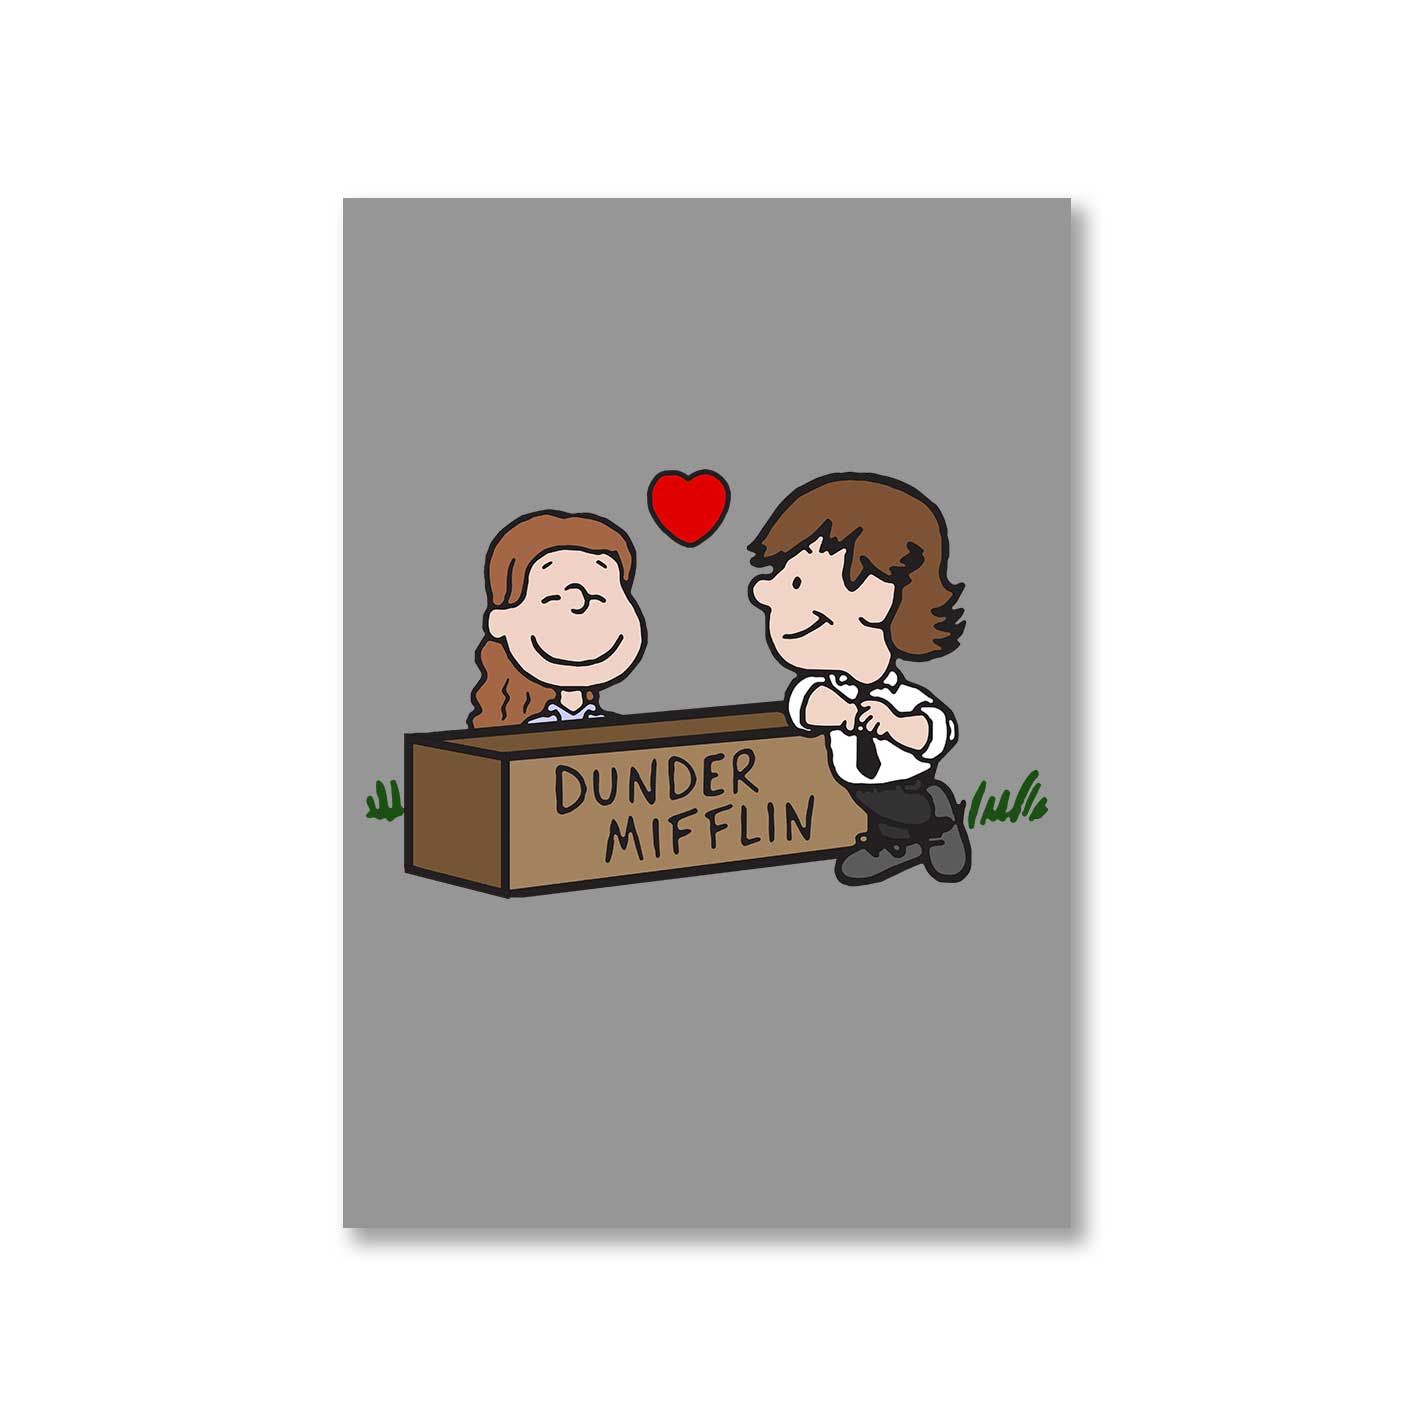 the office jim & pam poster wall art buy online india the banyan tee tbt a4